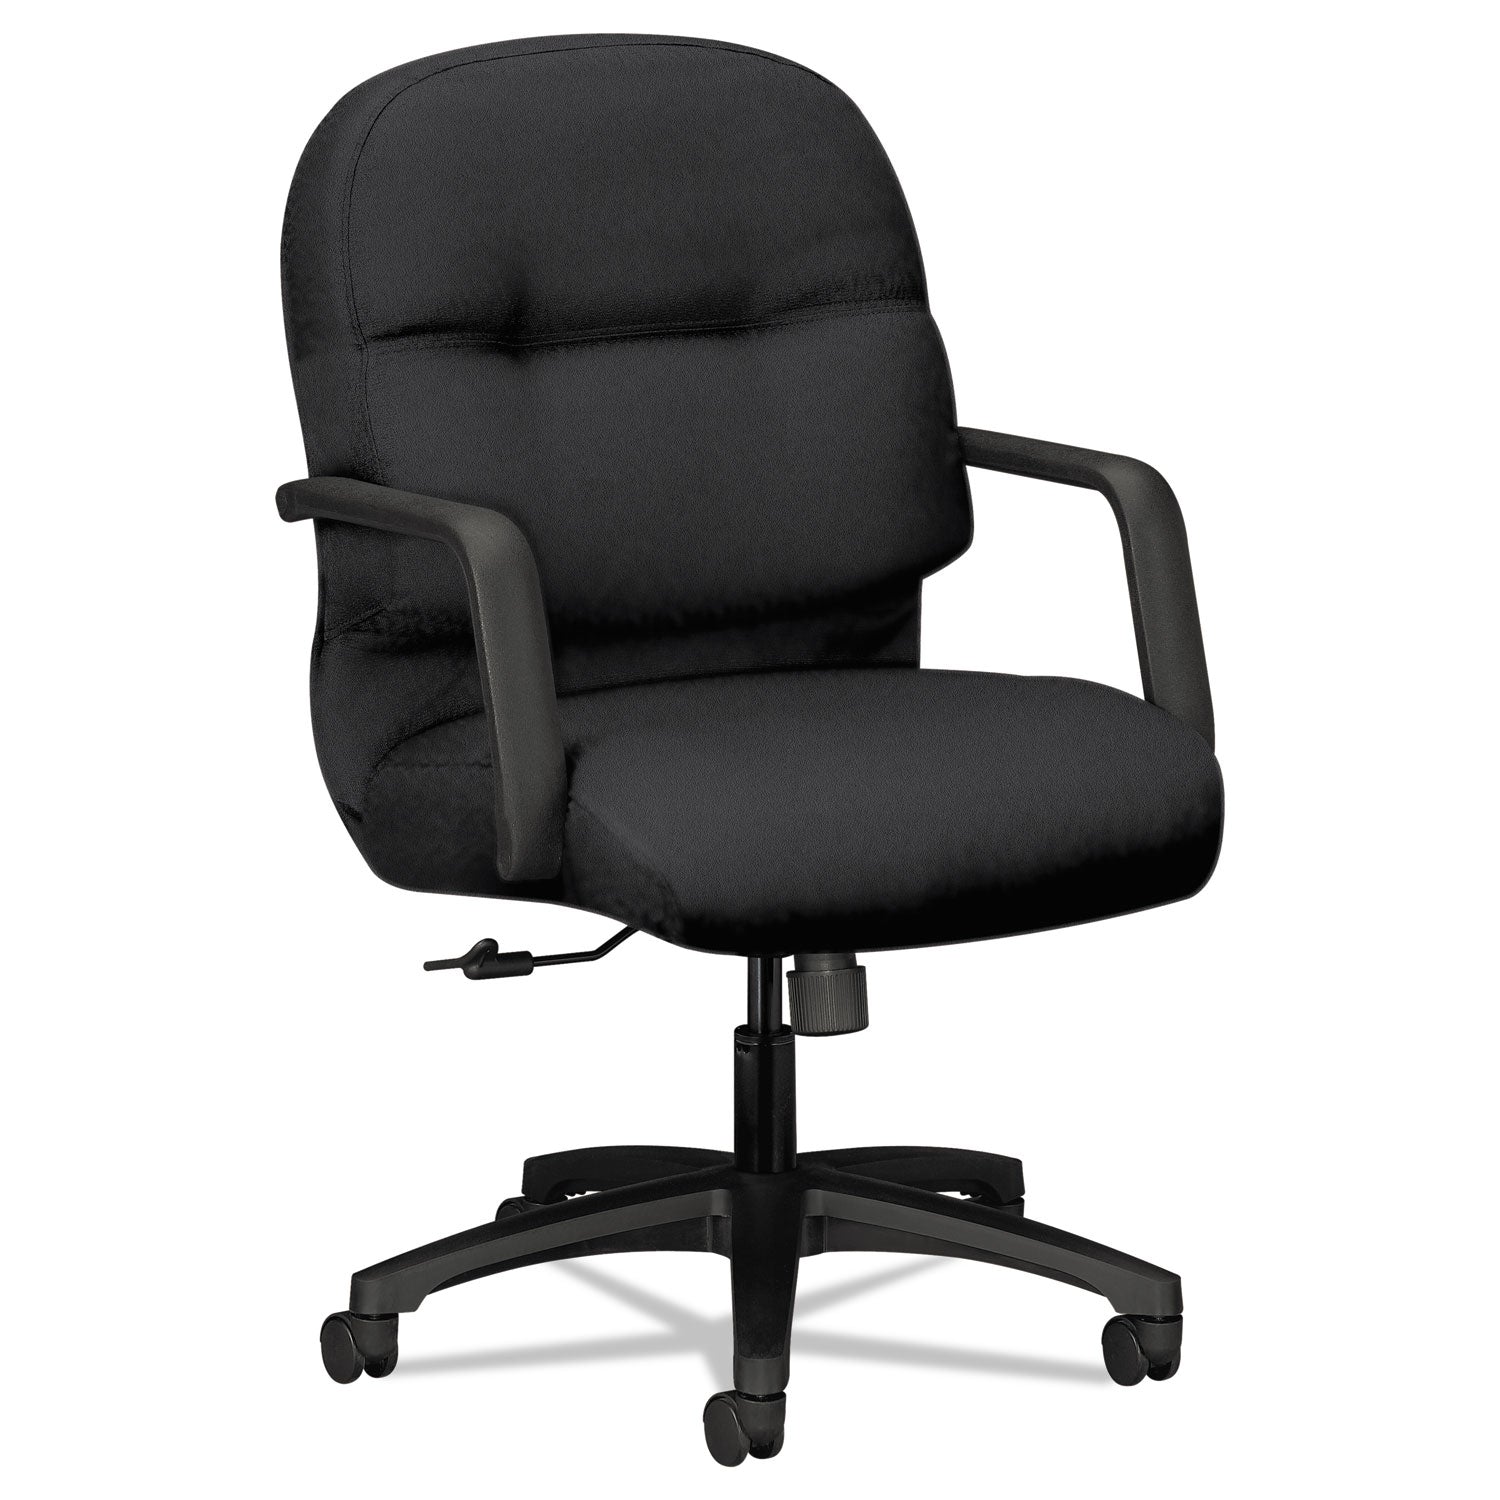 pillow-soft-2090-series-managerial-mid-back-swivel-tilt-chair-supports-up-to-300-lb-17-to-21-seat-height-black_hon2092cu10t - 1